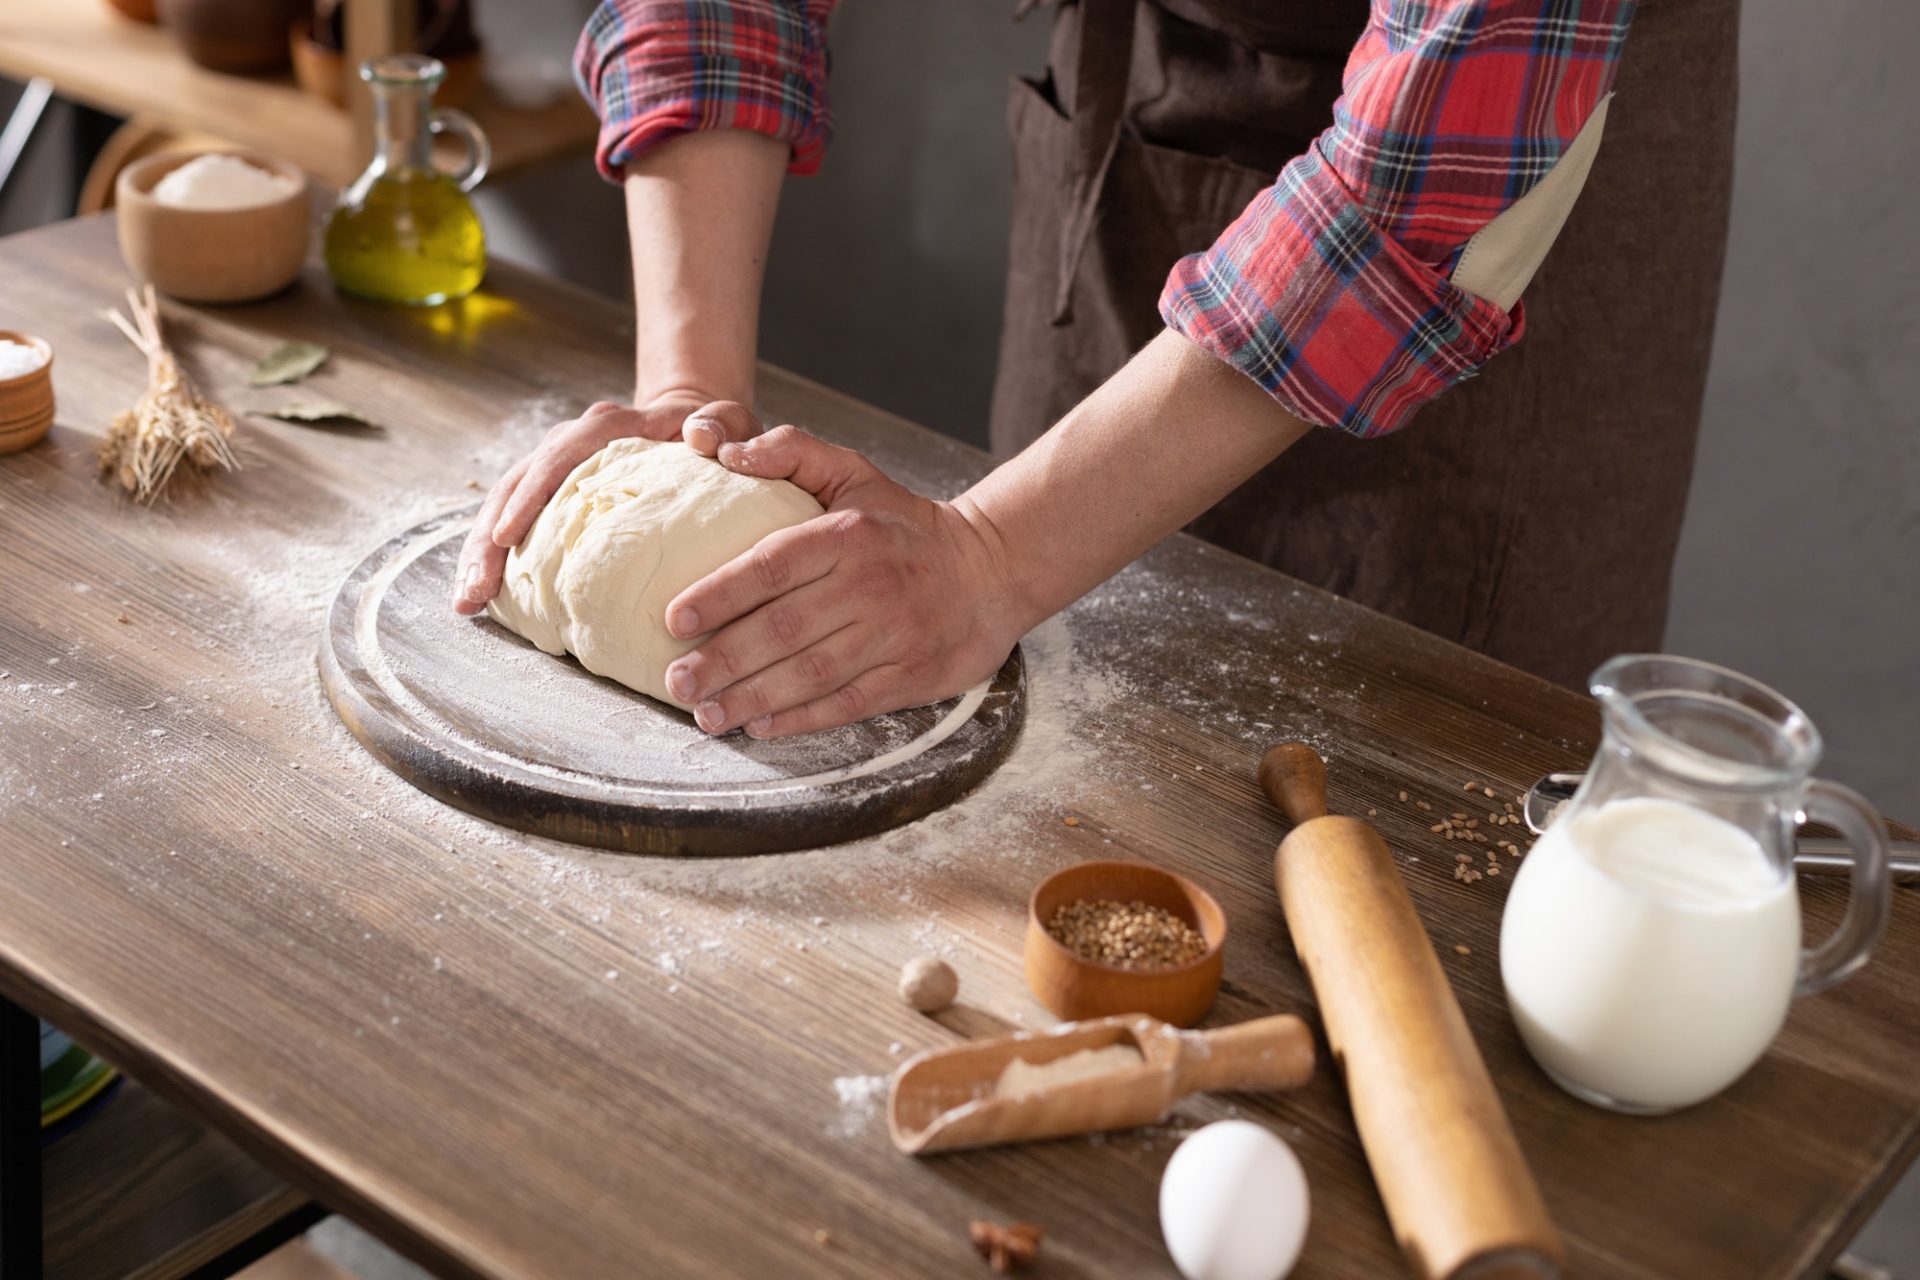 Baker man making dough and bakery ingredients for homemade bread cooking on table. Bakery concept